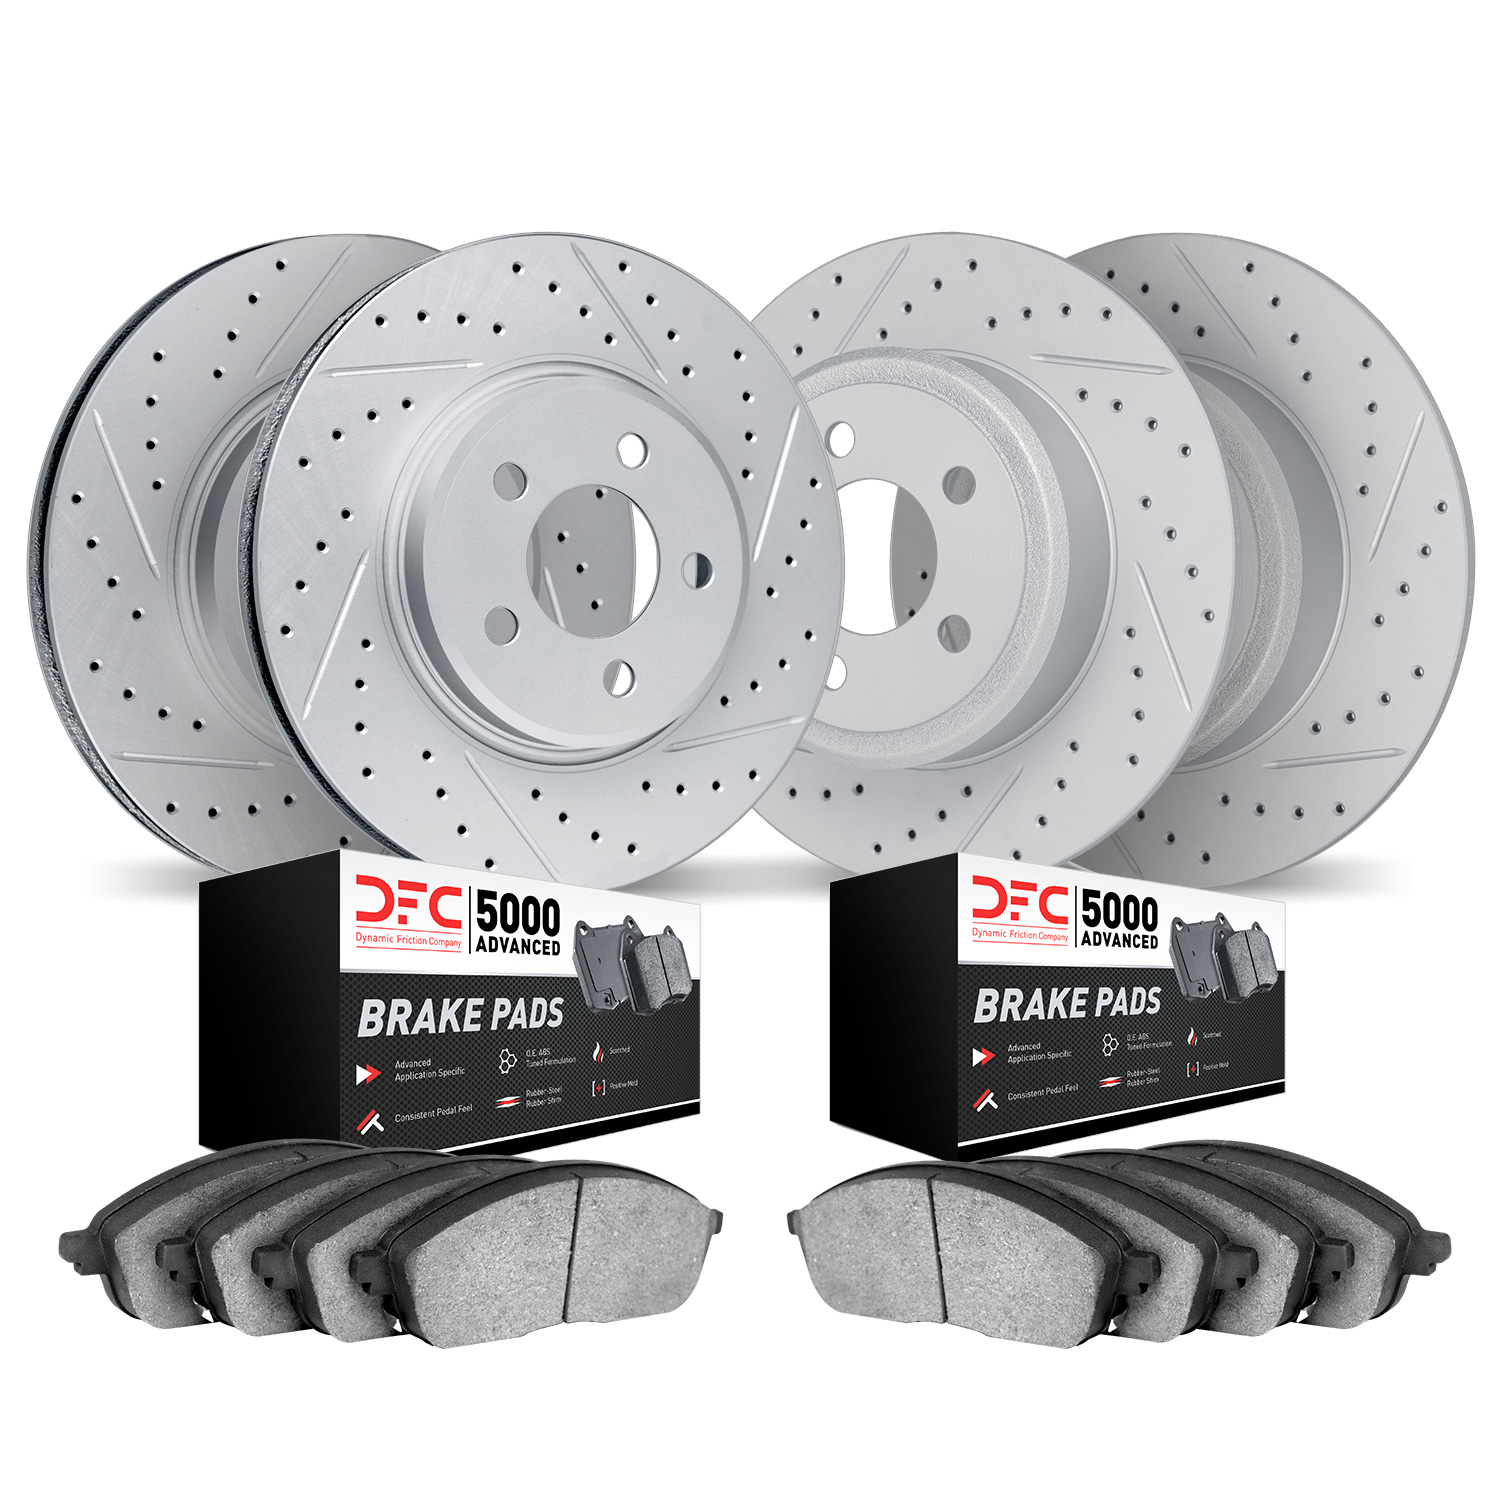 2504-59084 Geoperformance Drilled/Slotted Rotors w/5000 Advanced Brake Pads Kit, Fits Select Acura/Honda, Position: Front and Re